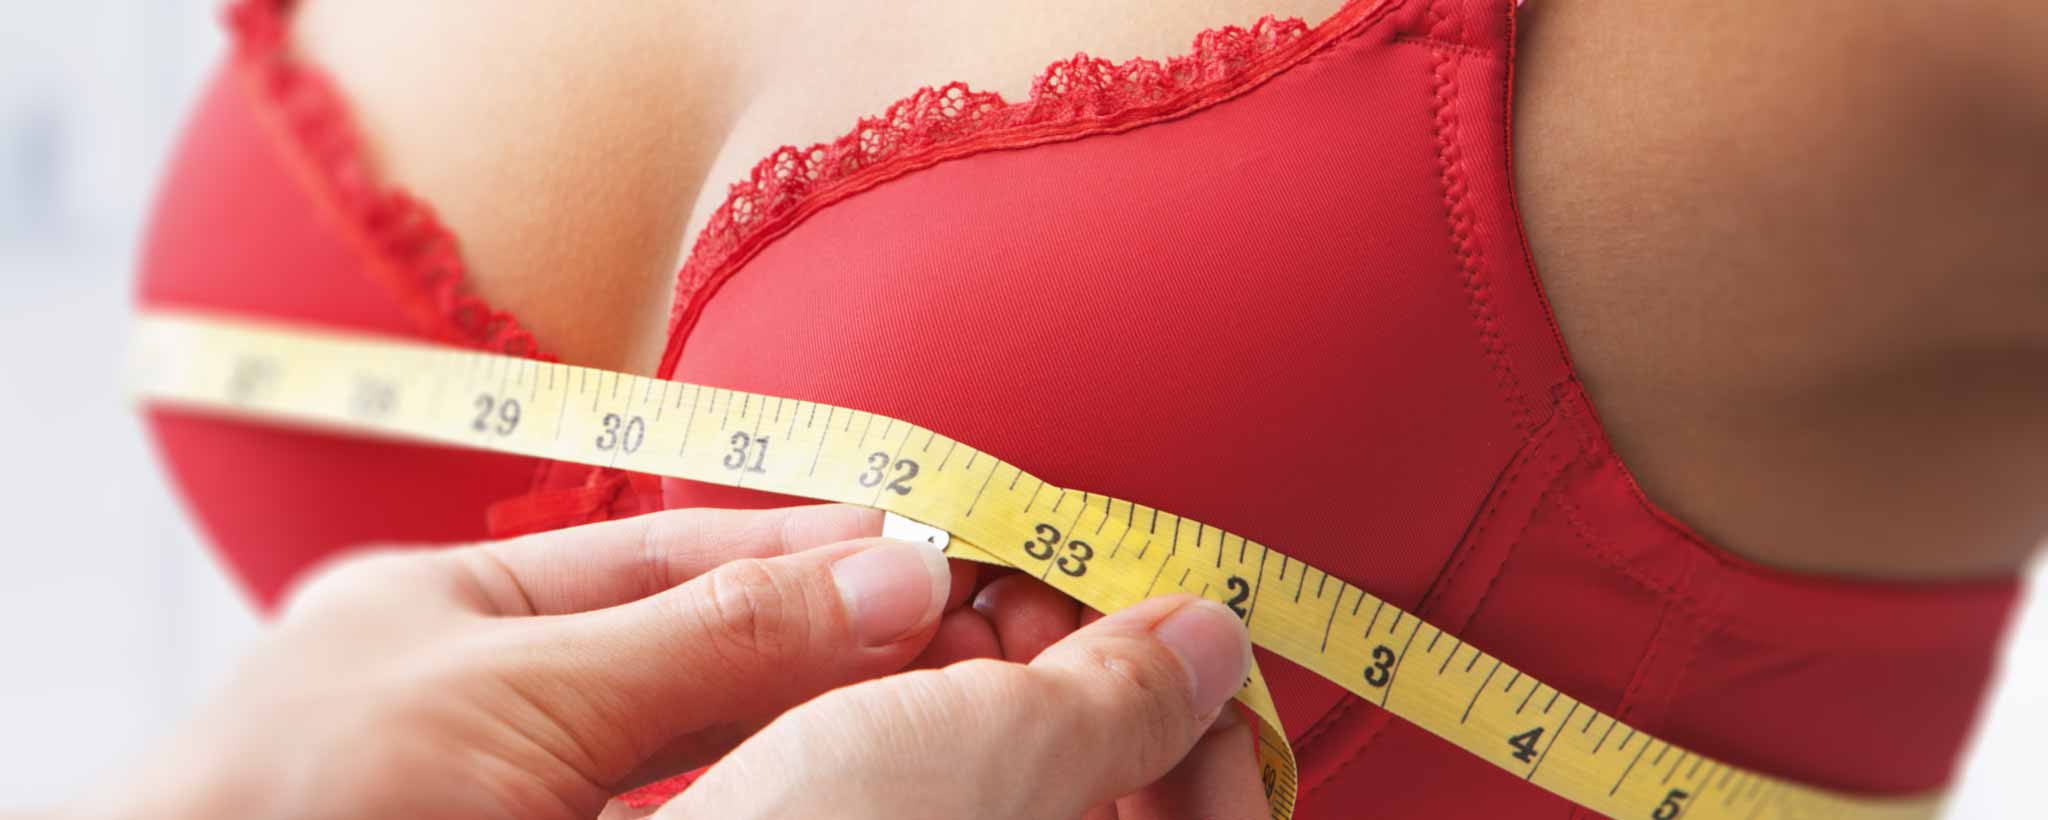 'How Breast Size Affects Cancer Risk'